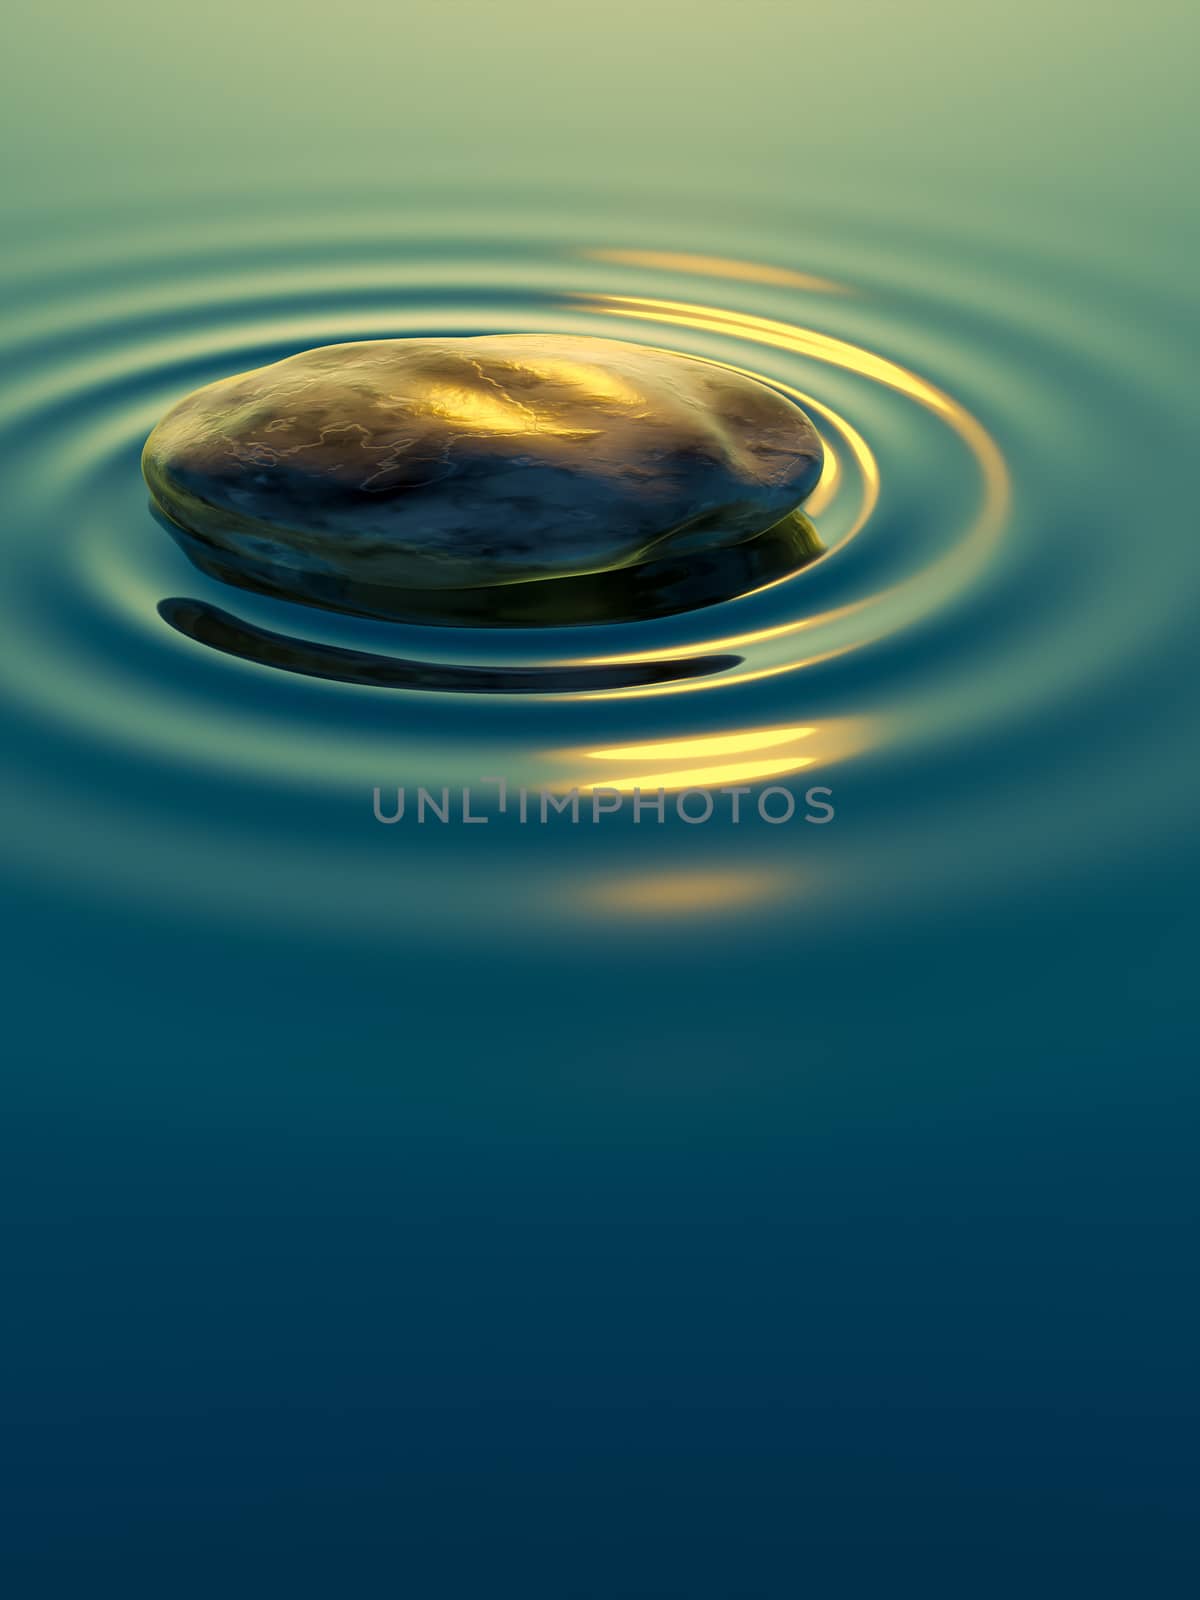 pebble stone in water with ripples background by magann